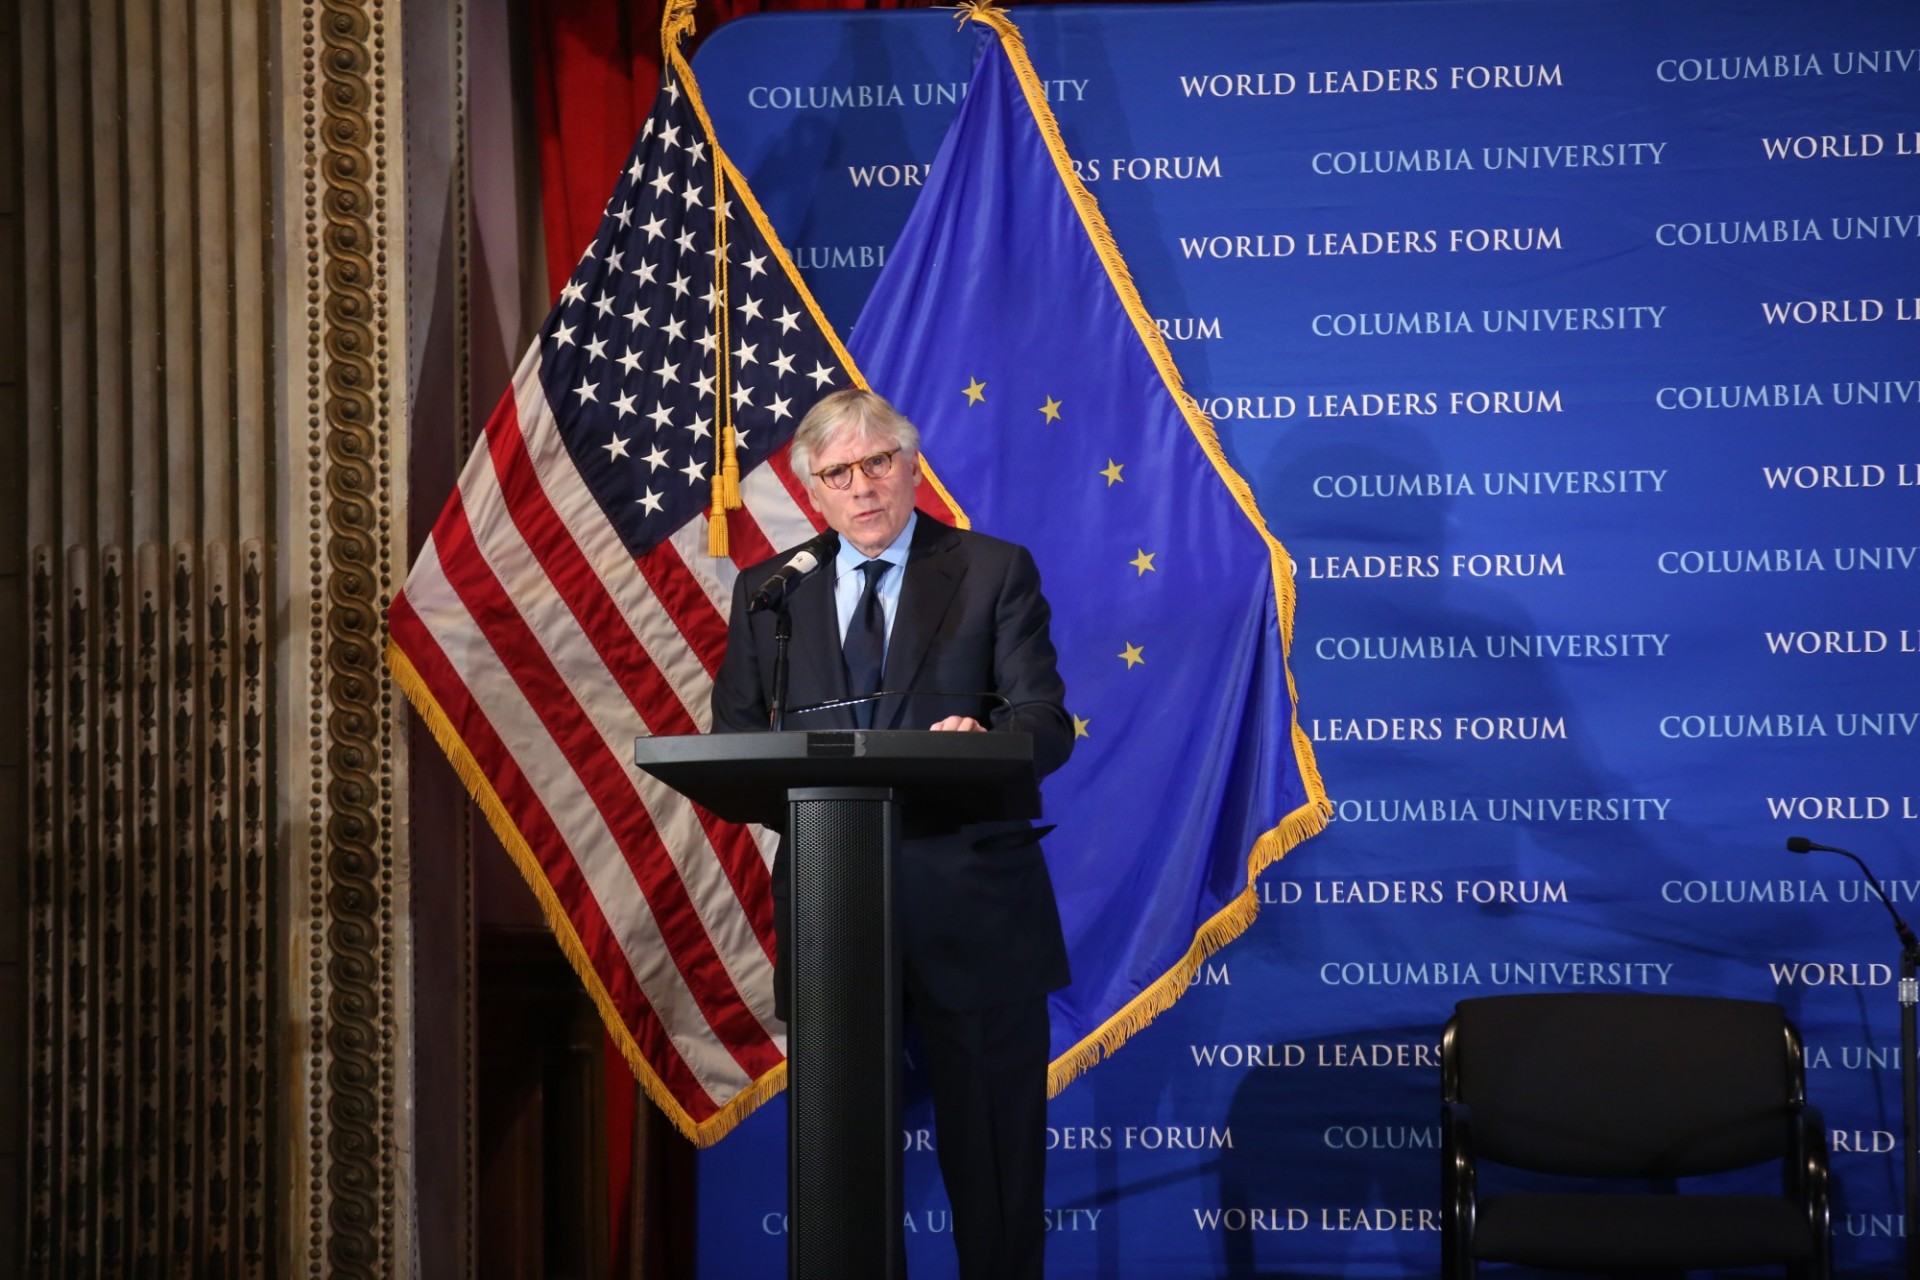 Lee C. Bollinger, President, Columbia University in the City of New York begins the World Leaders Forum with an introduction of President Antonio Tajani of the European Parliament.